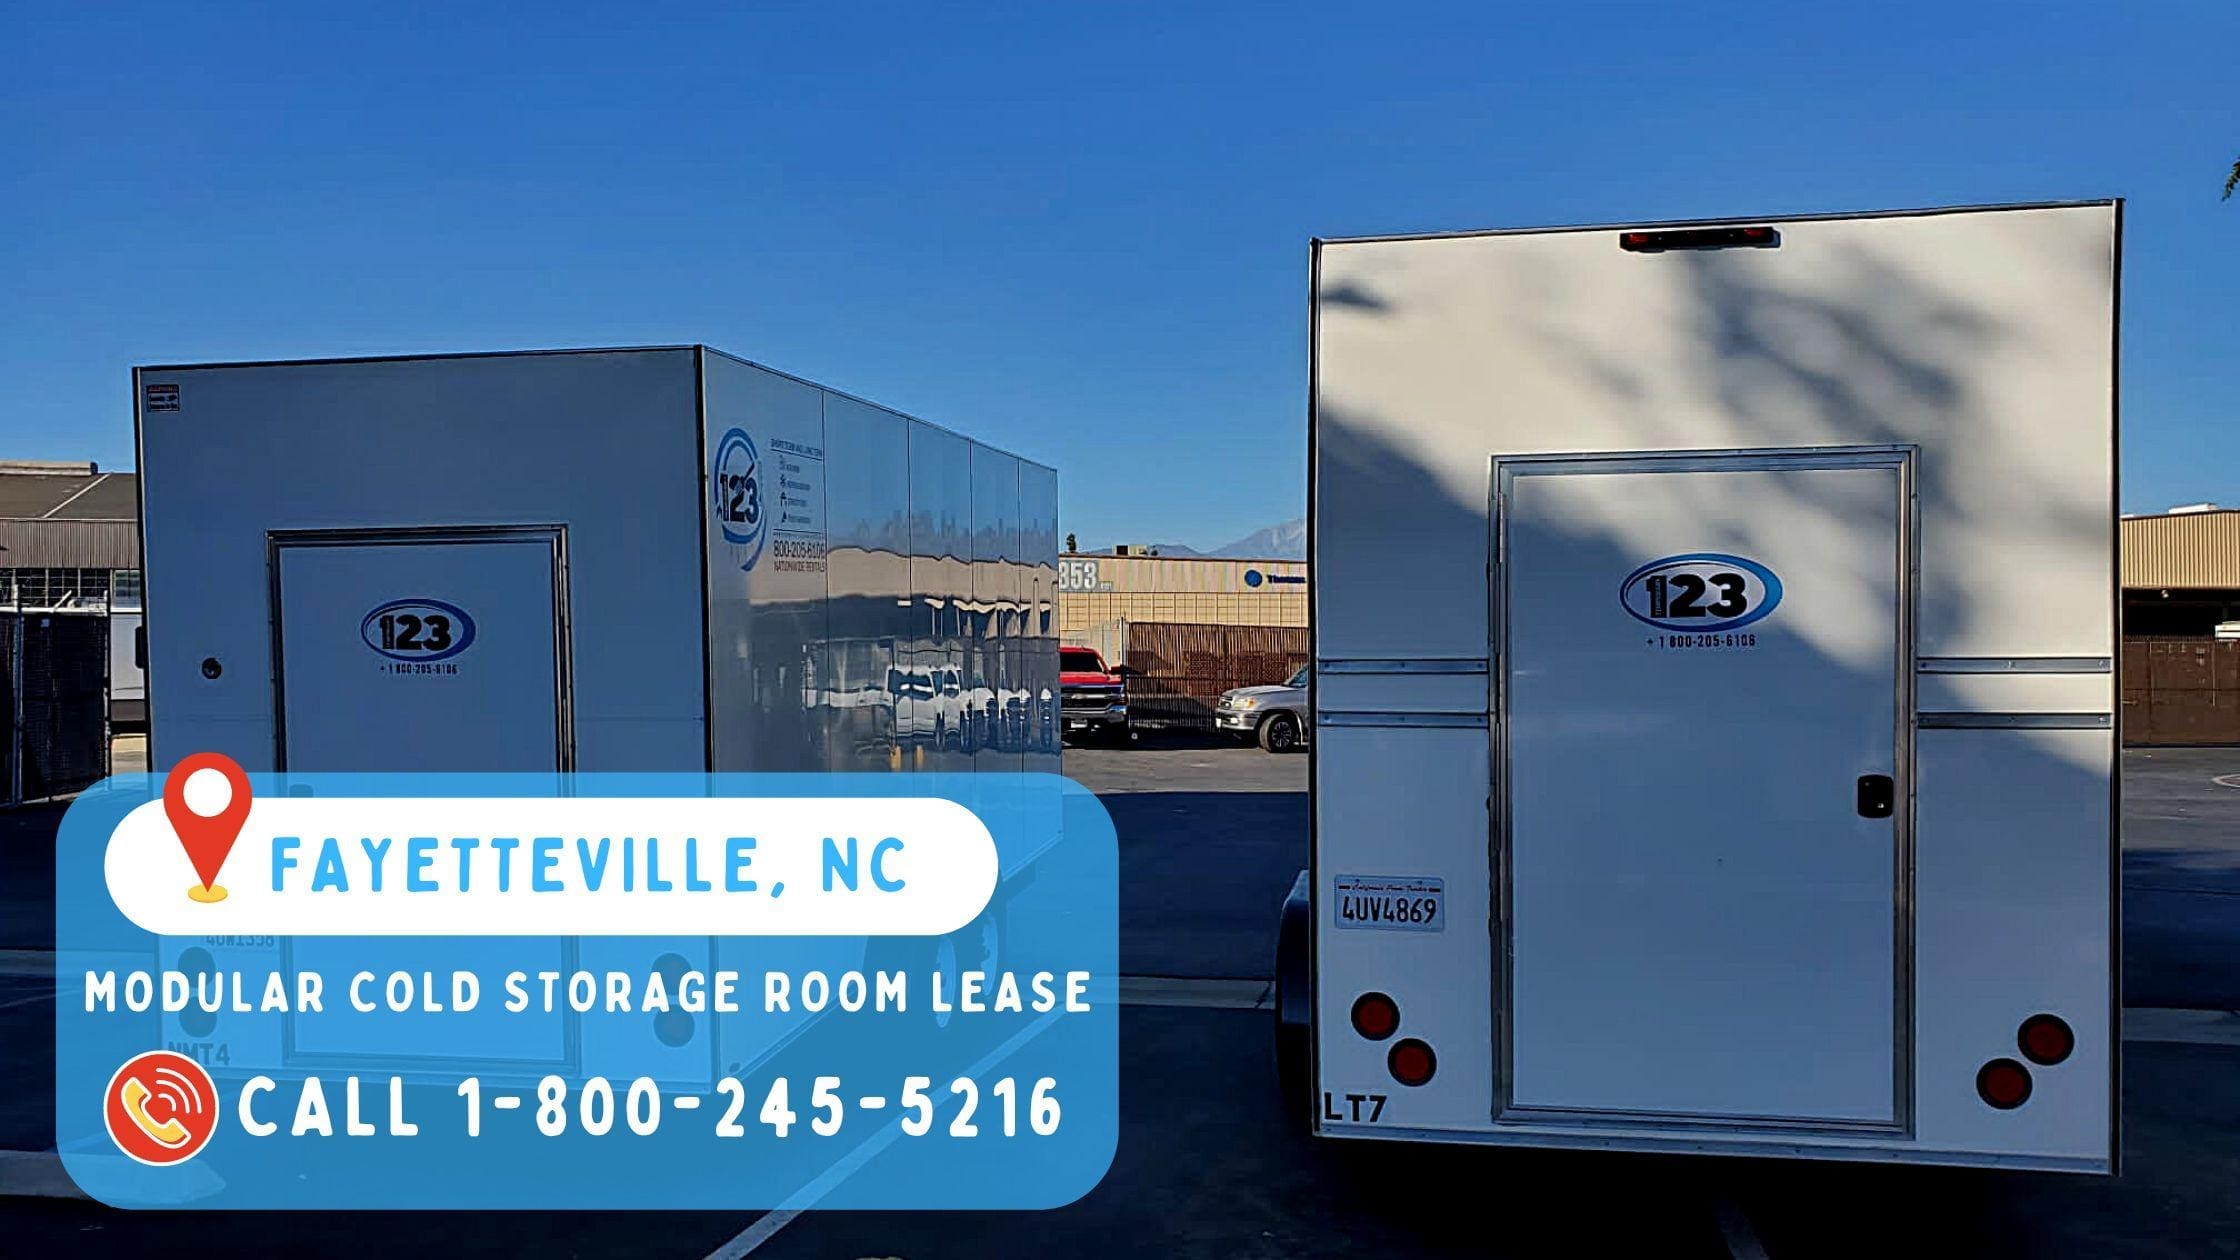 Modular Cold Storage Room Lease in Fayetteville